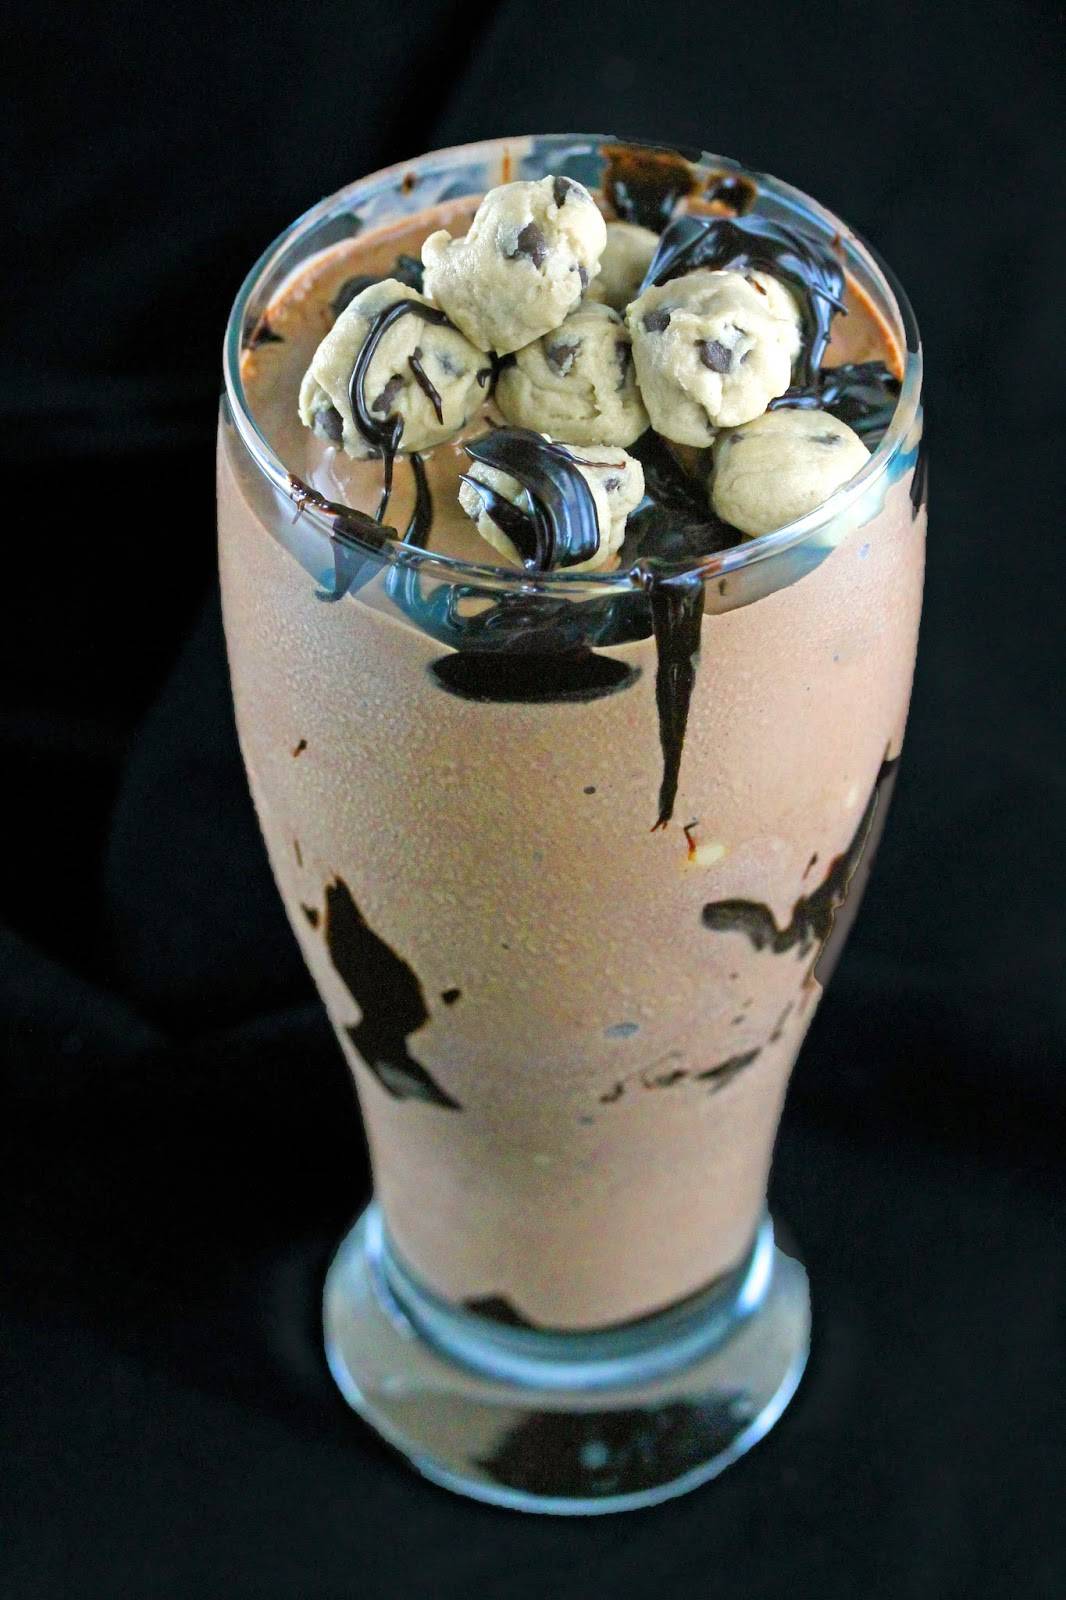 In this decadent dessert recipe I show you how to make your own frozen cookie dough bites. Then, I put them into a double fudge chocolate shake. Sound amazing? It is!